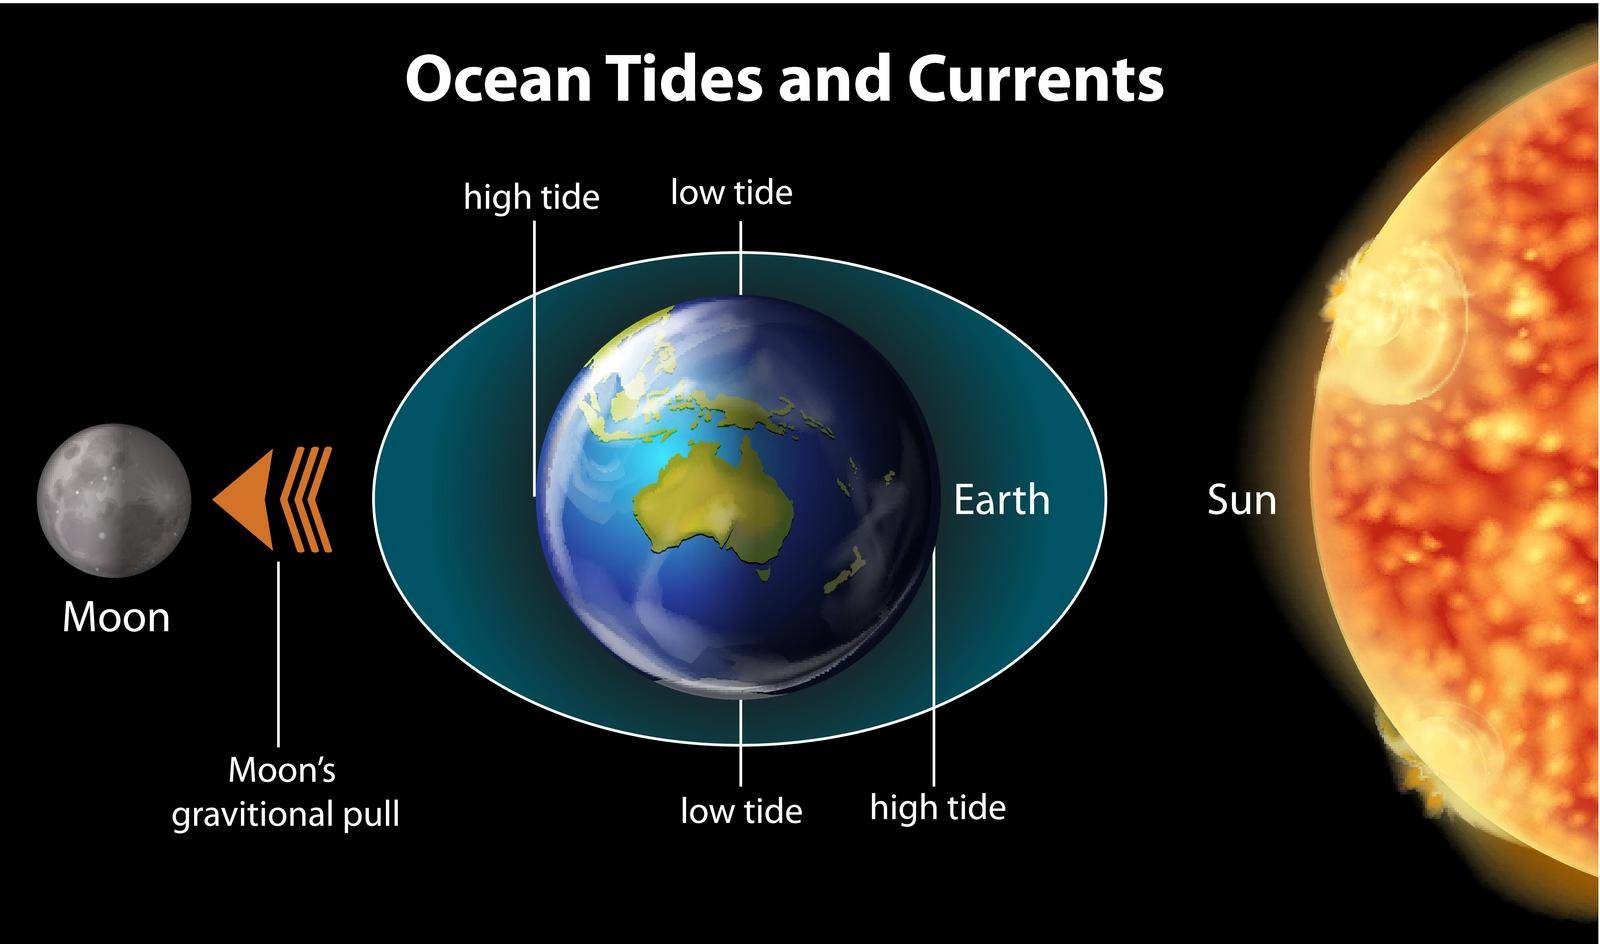 Ocean Tides and Currents by iimages